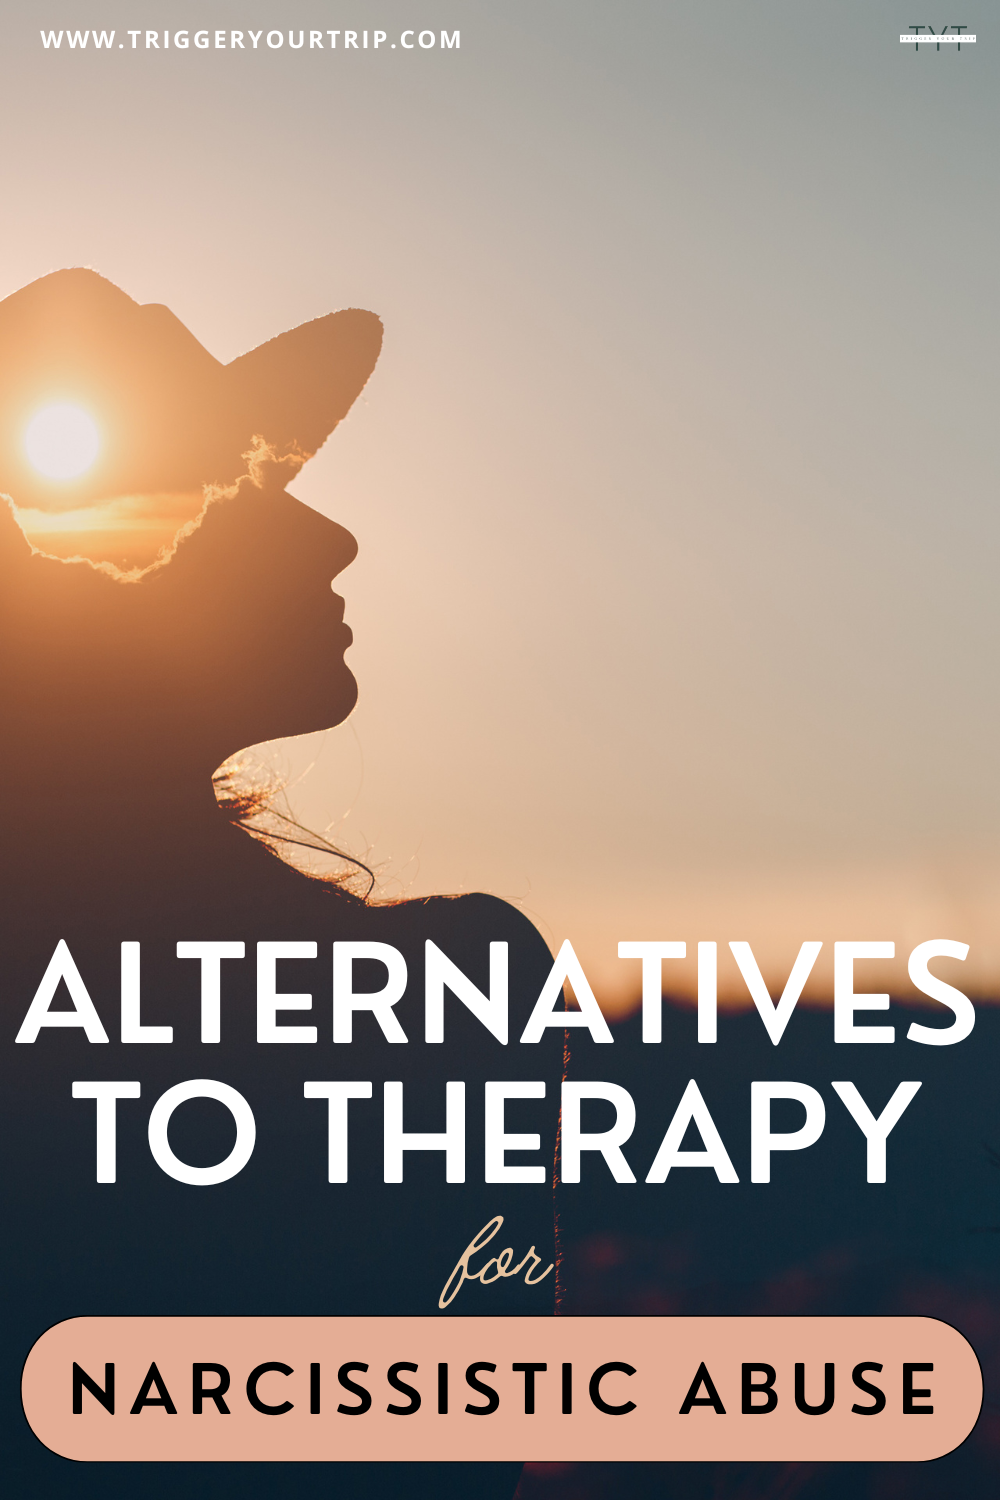 Alternatives for narcissistic abuse and verbal abuse, and traumatic relationship